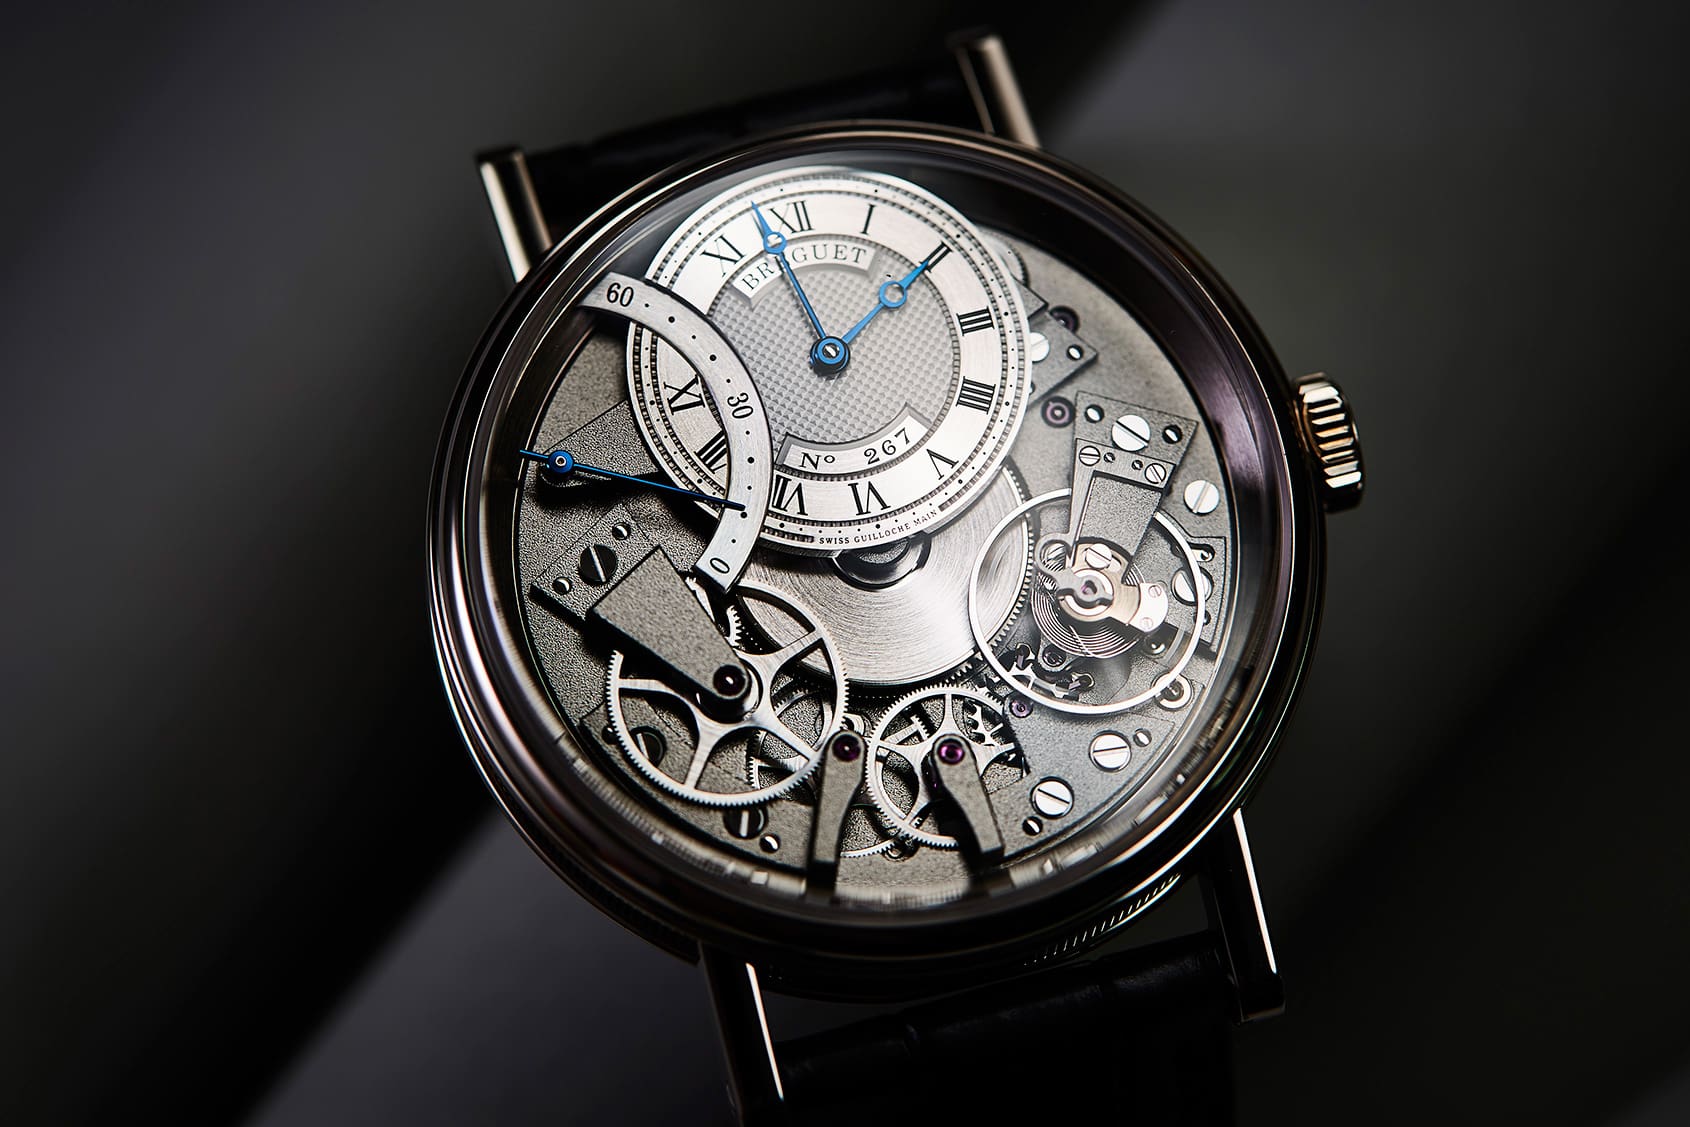 INSIGHT: Classic design pushed forward – the world of watchmaking at Breguet